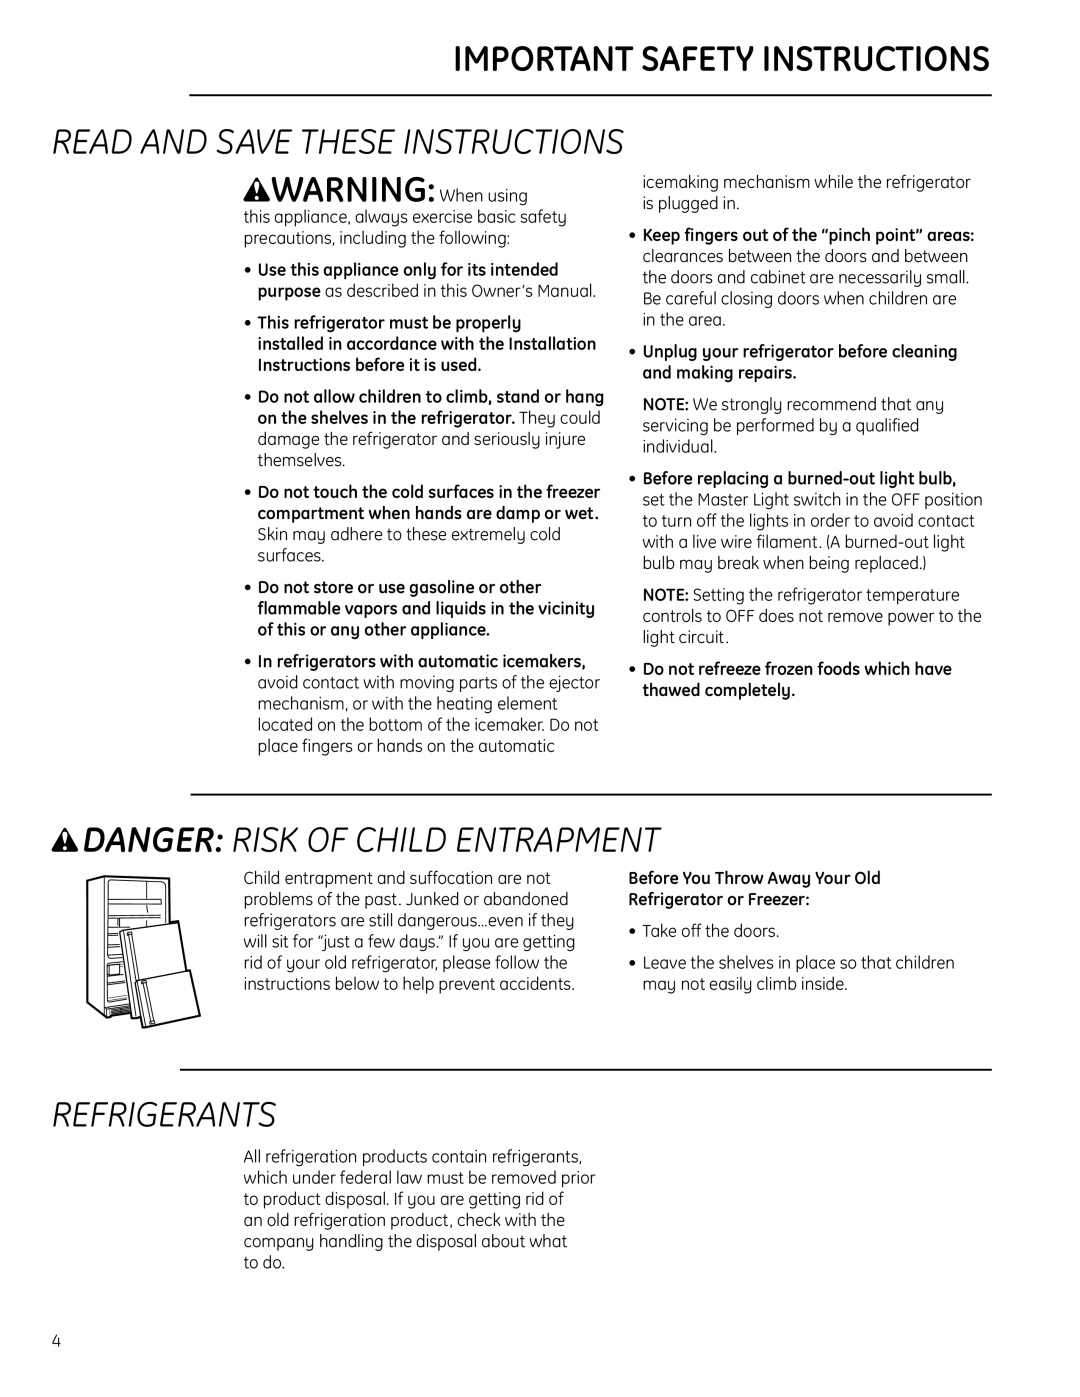 GE Monogram Bottom-Freezer Built-In Refrigerator Important Safety Instructions, Read And Save These Instructions 